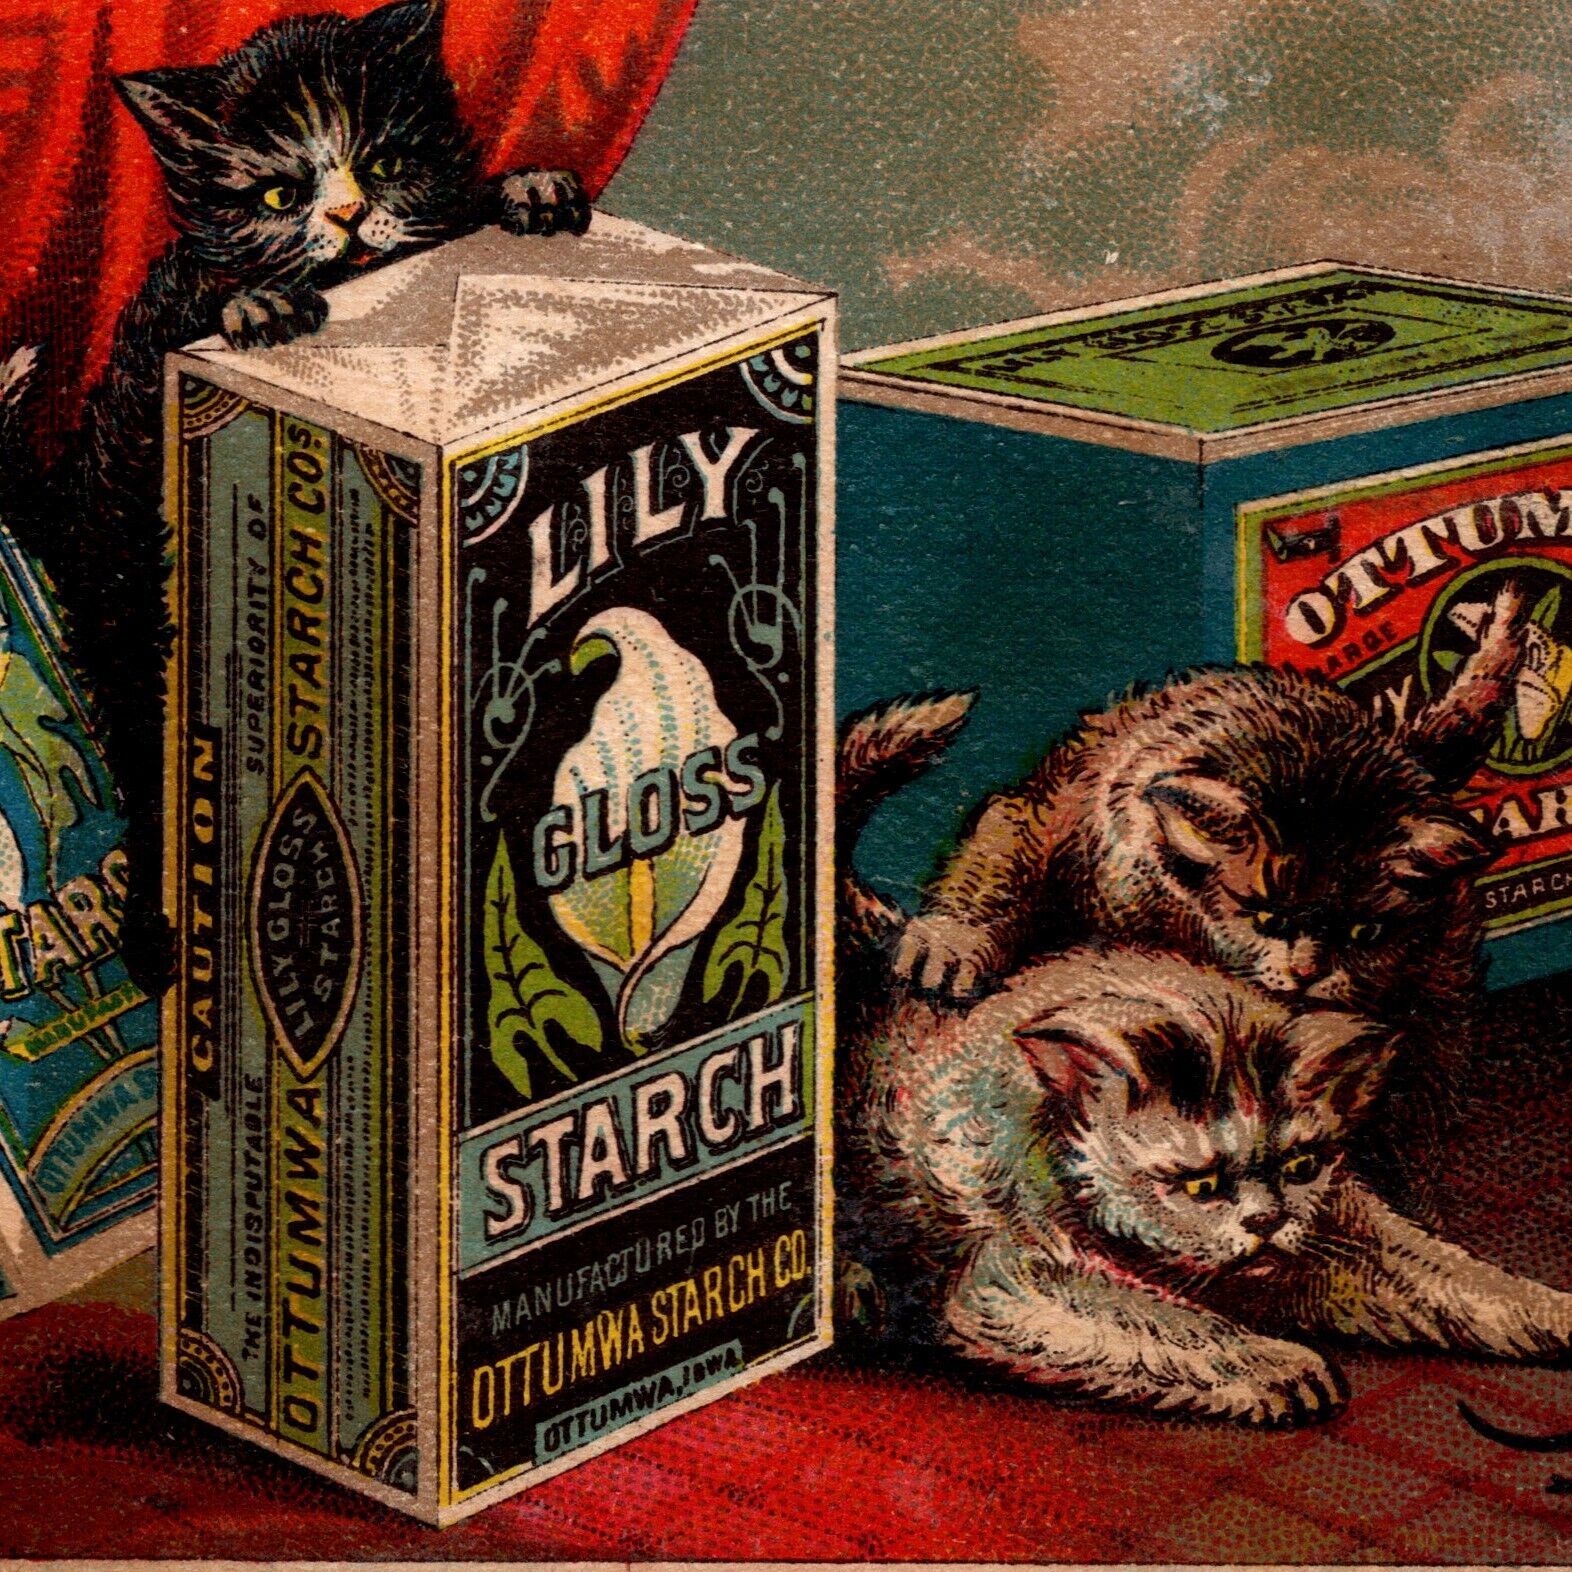 Three Cats Kittens Chasing Mouse Lily Gloss Corn Starch Victorian Trade Card